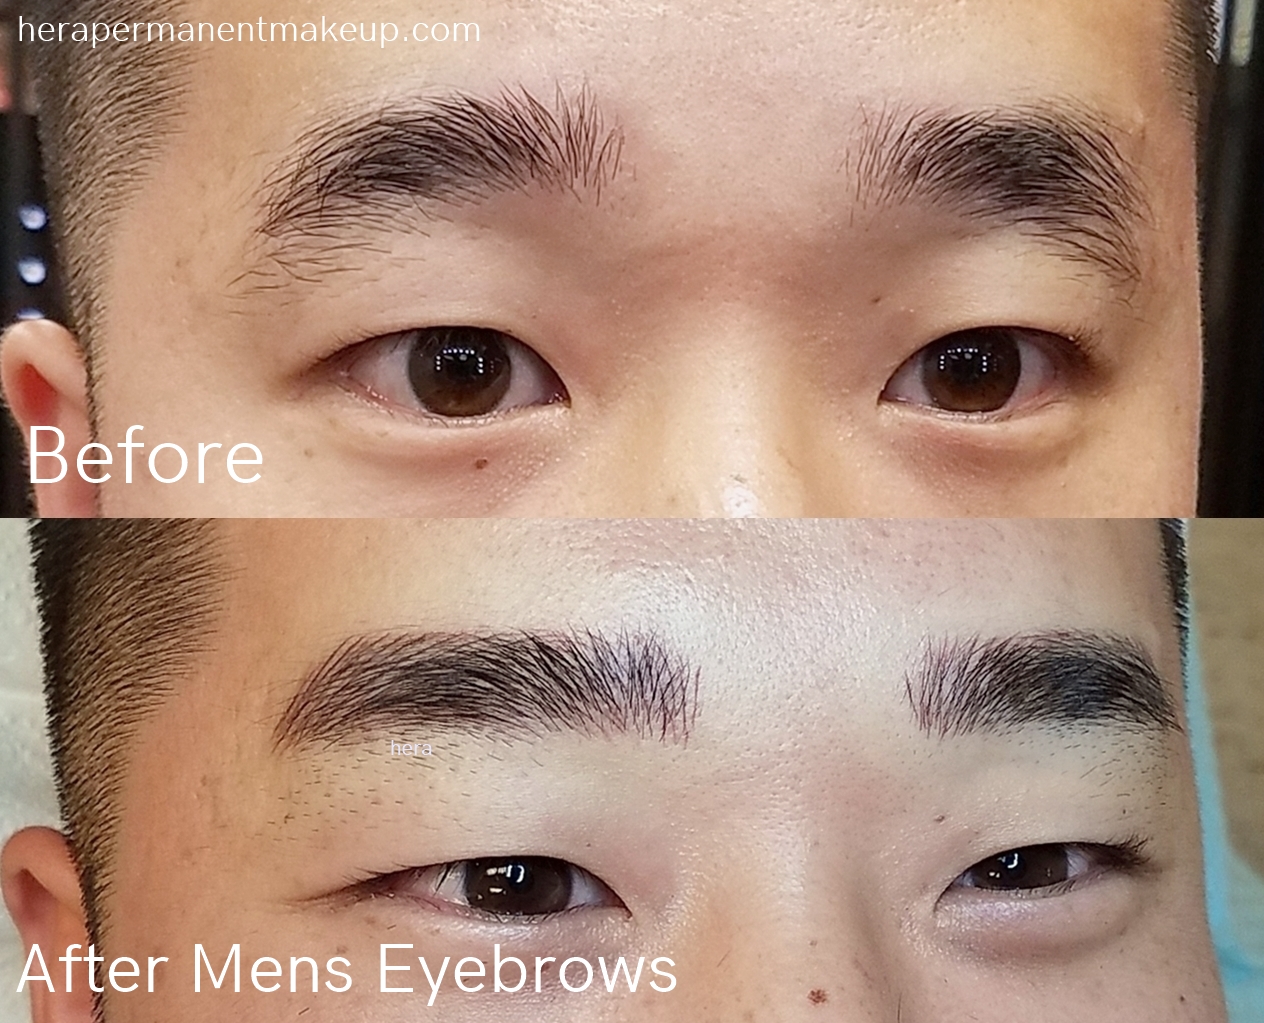 Men get their Eyebrows Tattooed Too  Beauty Tattooist  Natural Vancouver  Microblading Eyebrows  Eyeliner Tattoo Artist